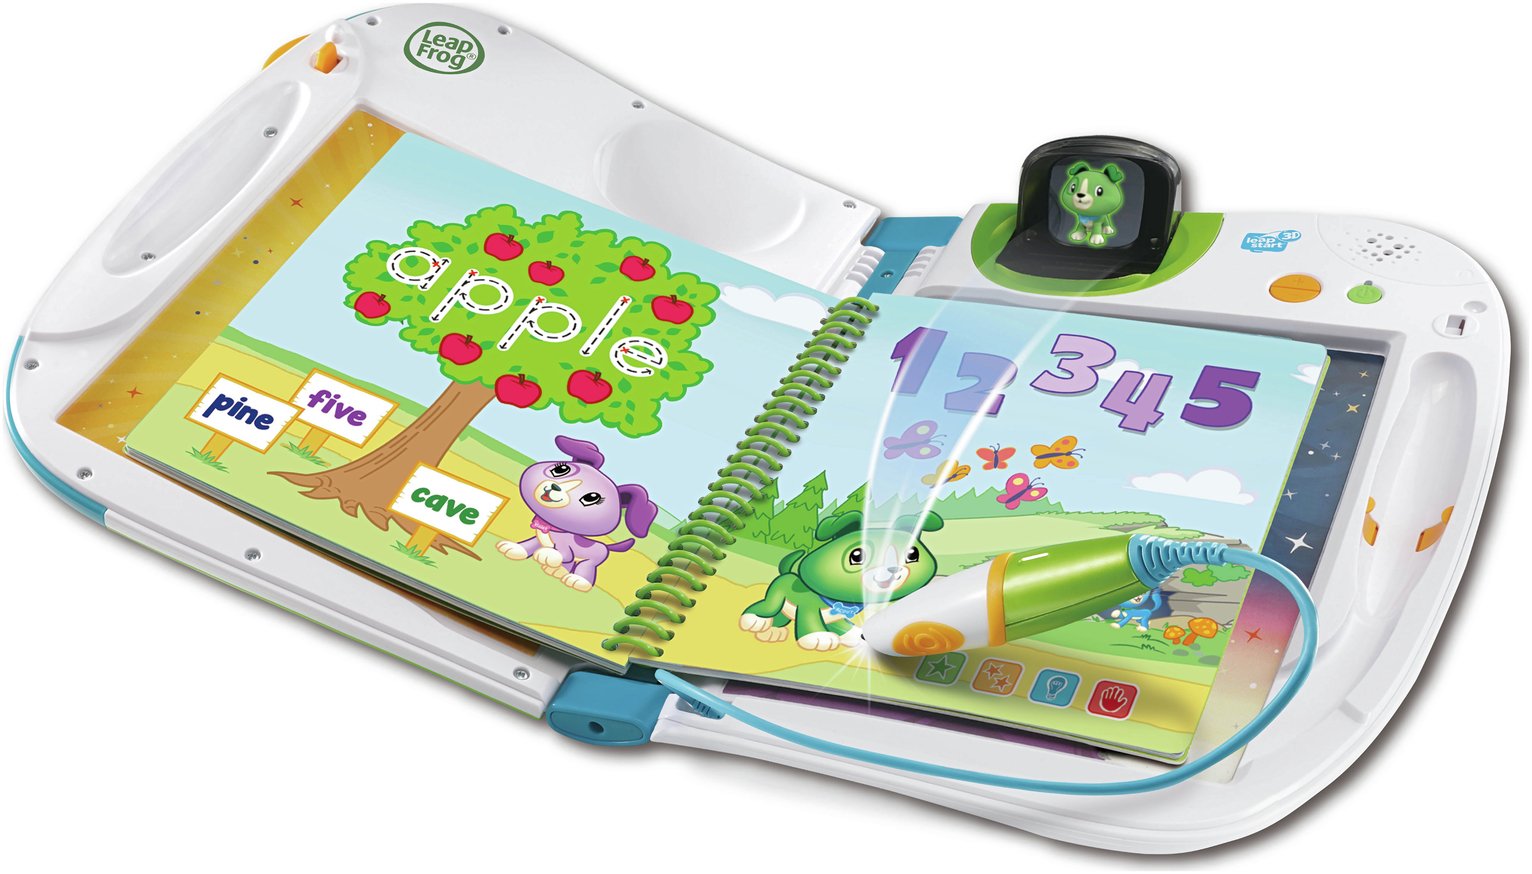 Leapfrog LeapStart 3D Interactive Learning System Review